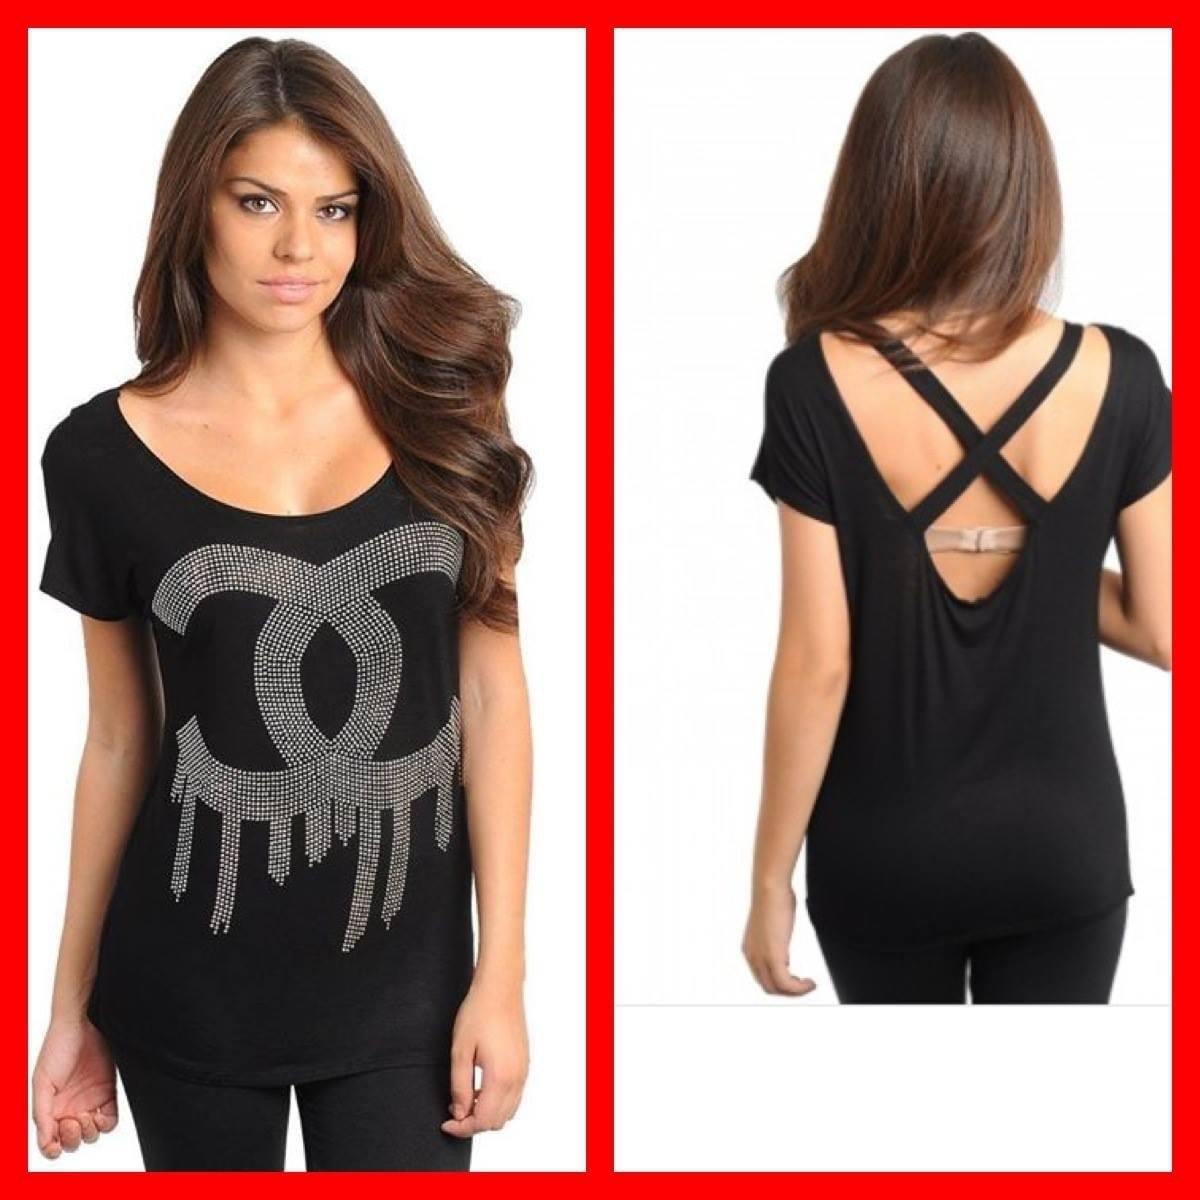 Dripping C’s Tee - HOT SUGAR BOUTIQUE